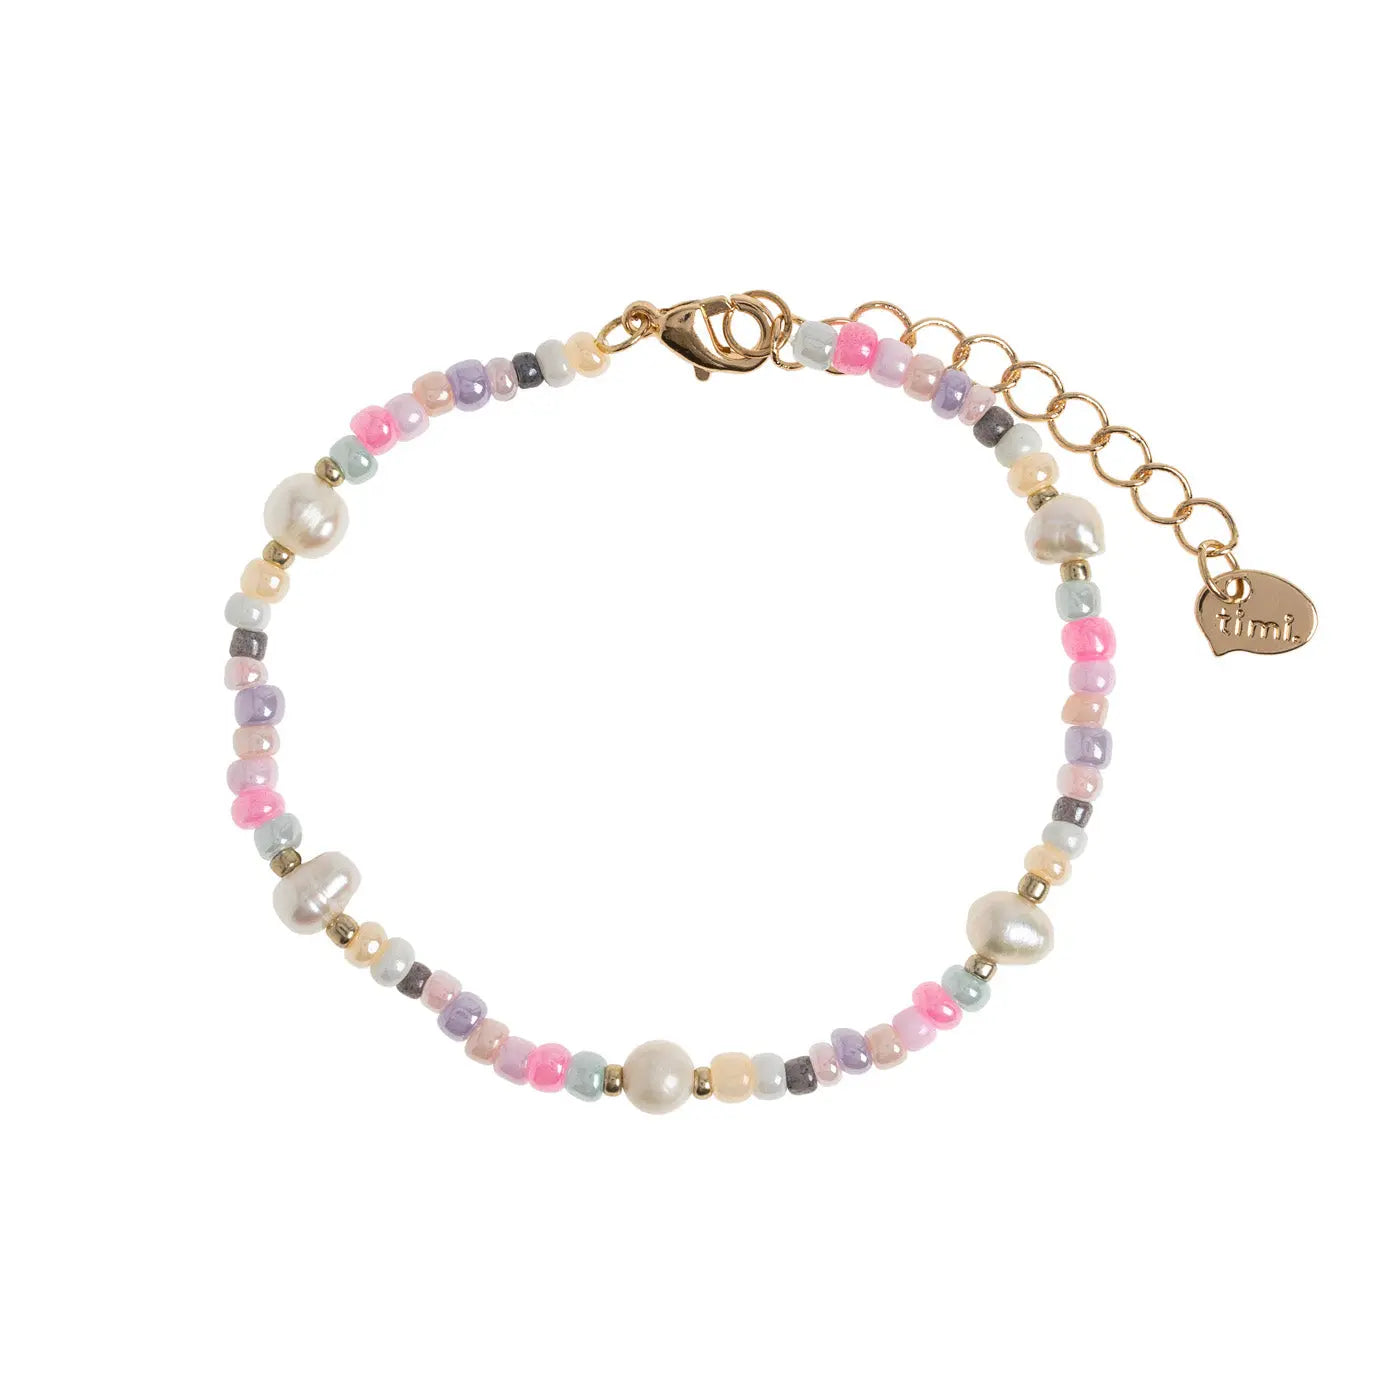 Tess - Pastel Bead and Pearl Bracelet